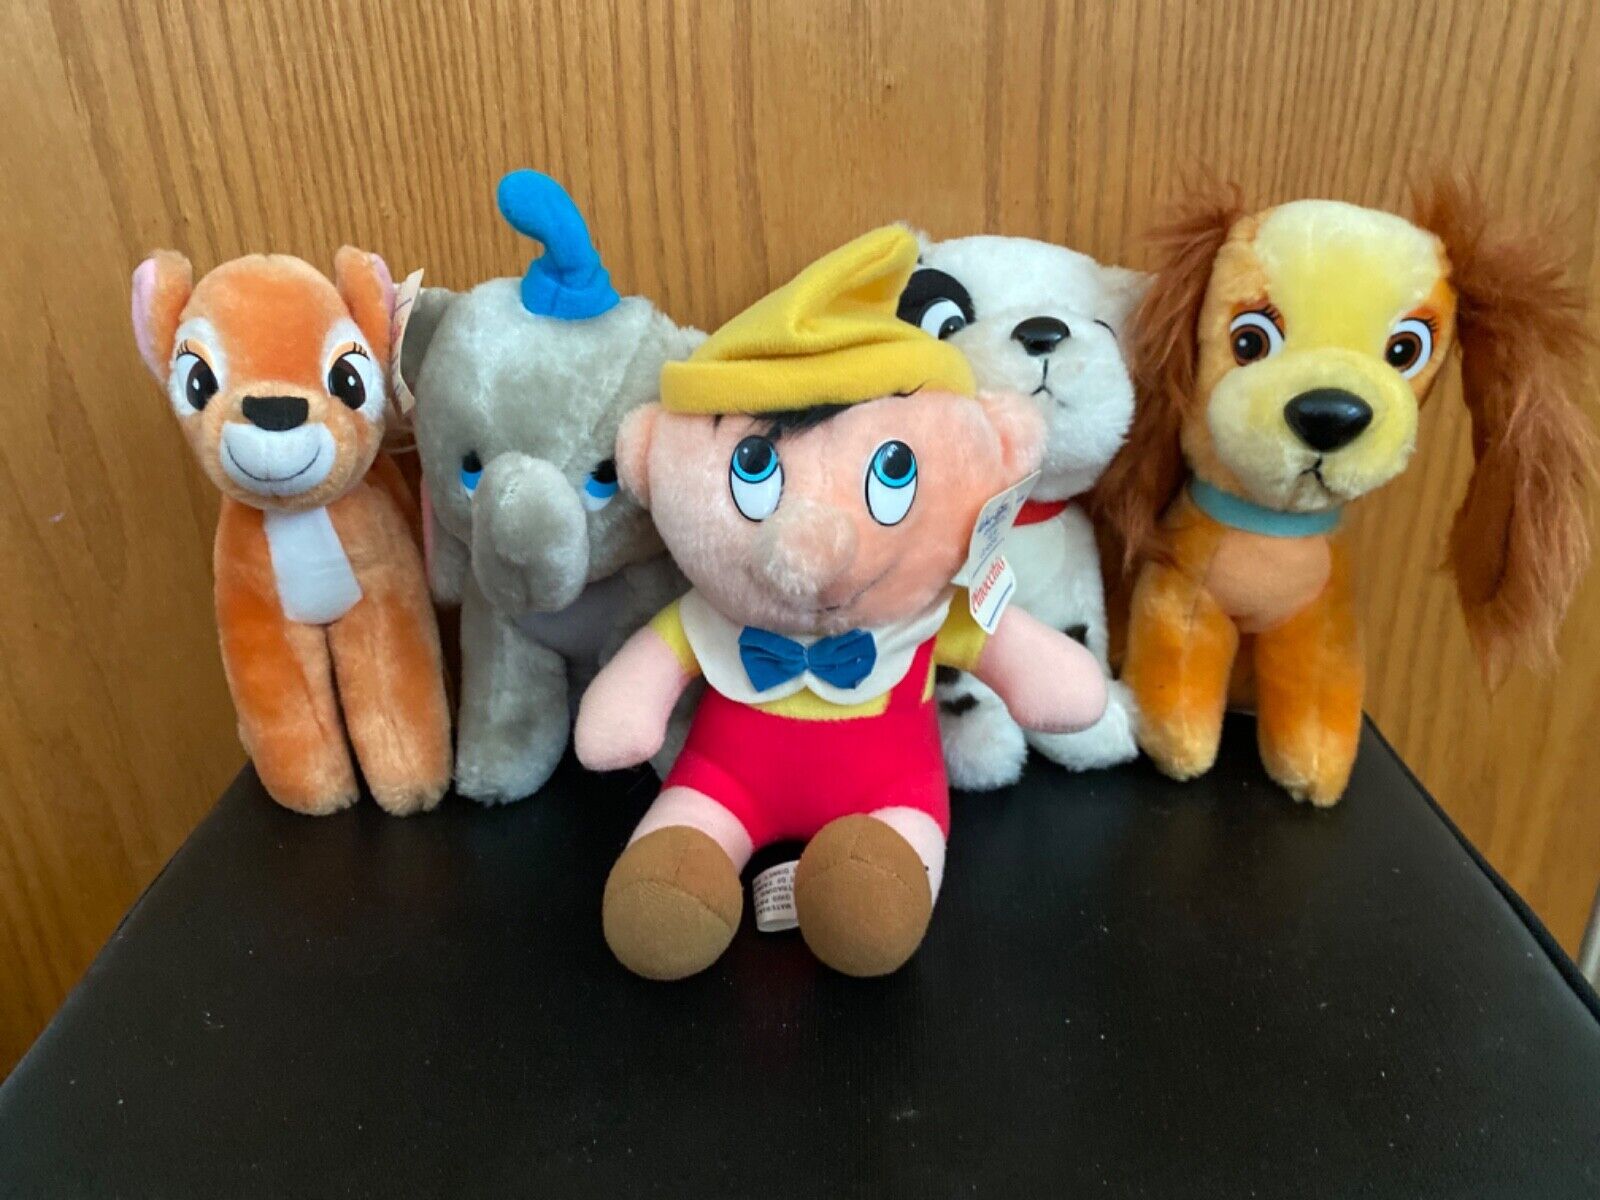 Lot of 5 Vintage Walt Disney Animated Film Classic Plush All with Original Tags